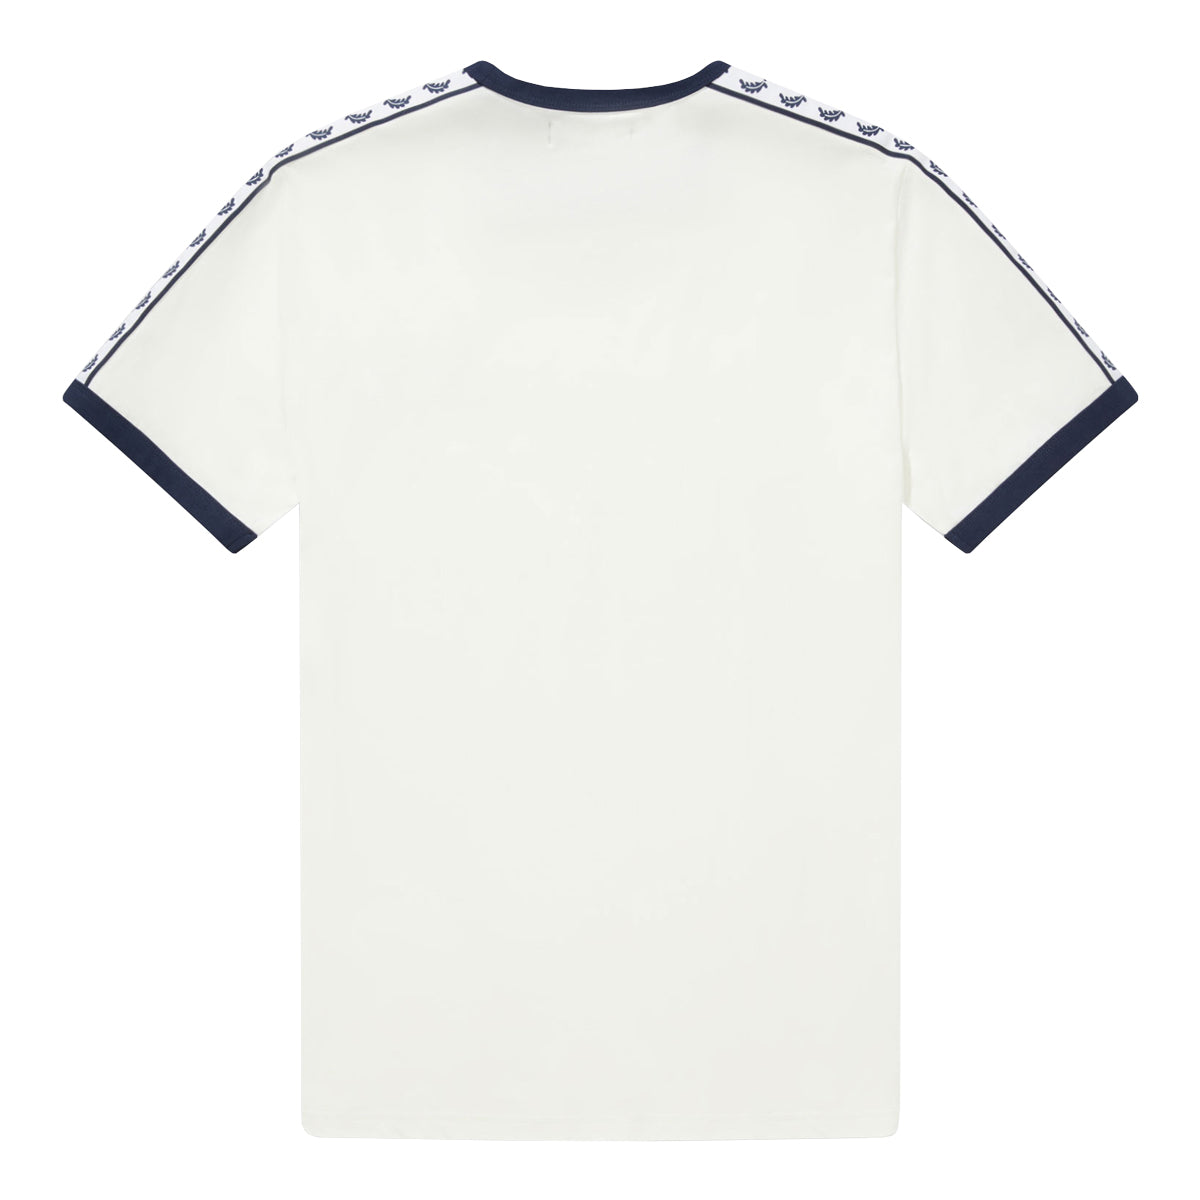 Fred Perry Taped Ringer T-Shirt Snow White/Carbon Blue. Foto de costas.